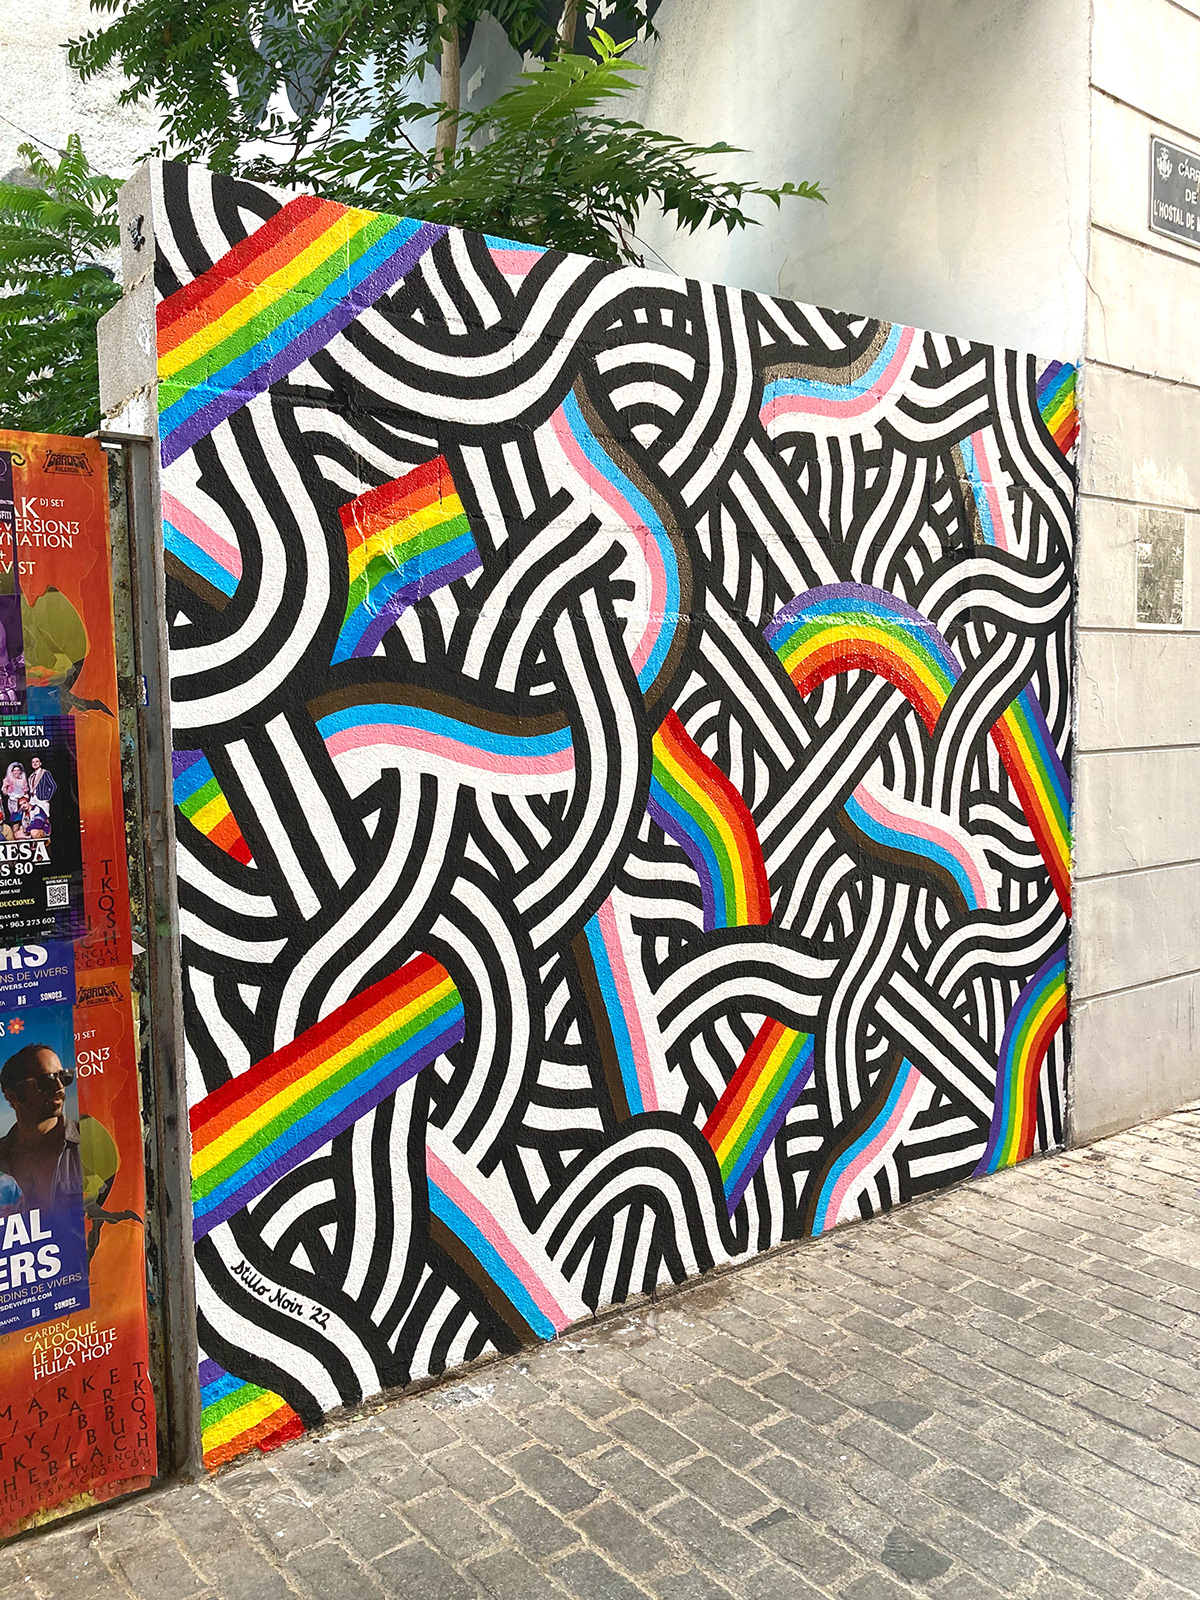 A black and white mural with the progress pride flag colors integrated, by Stillo Noir